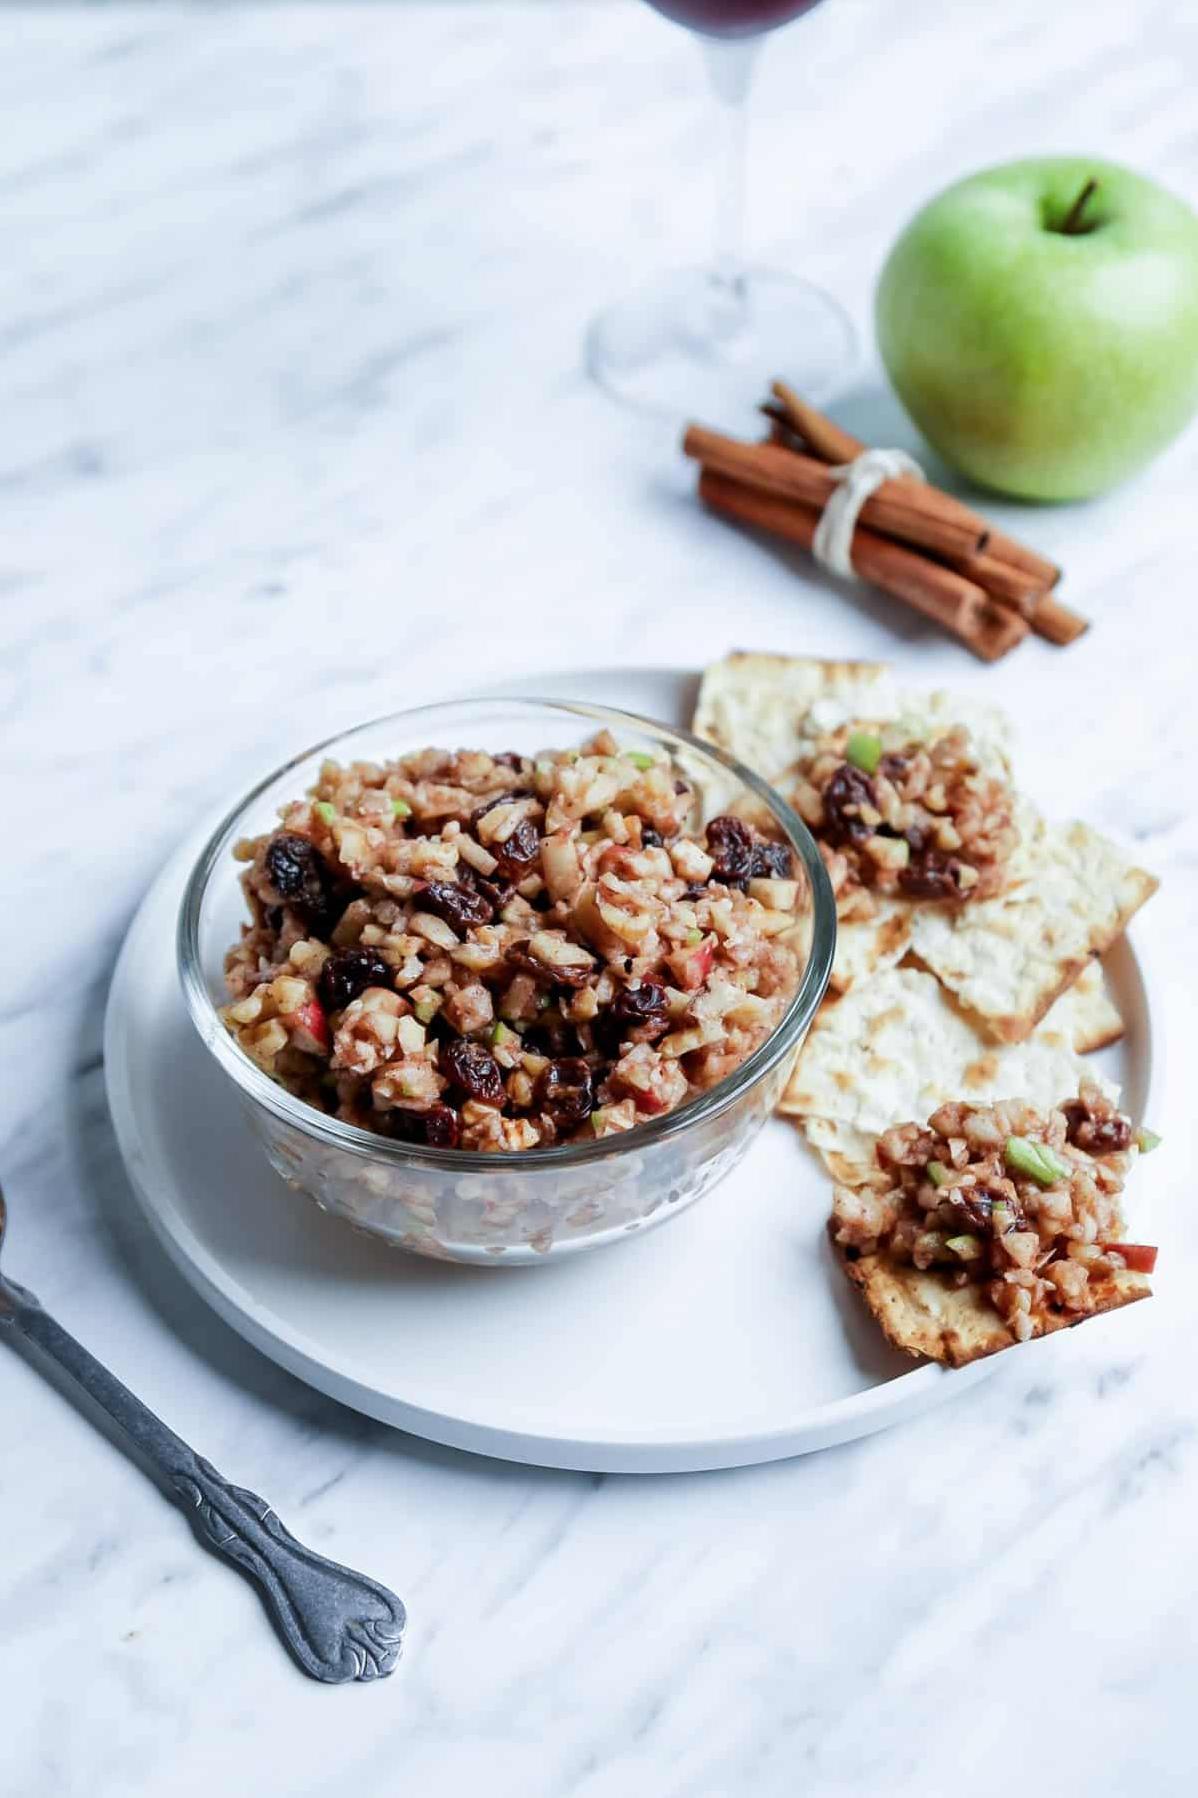  The combination of crisp apples, dried cherries, and crunchy walnuts create a satisfying crunch with every bite.